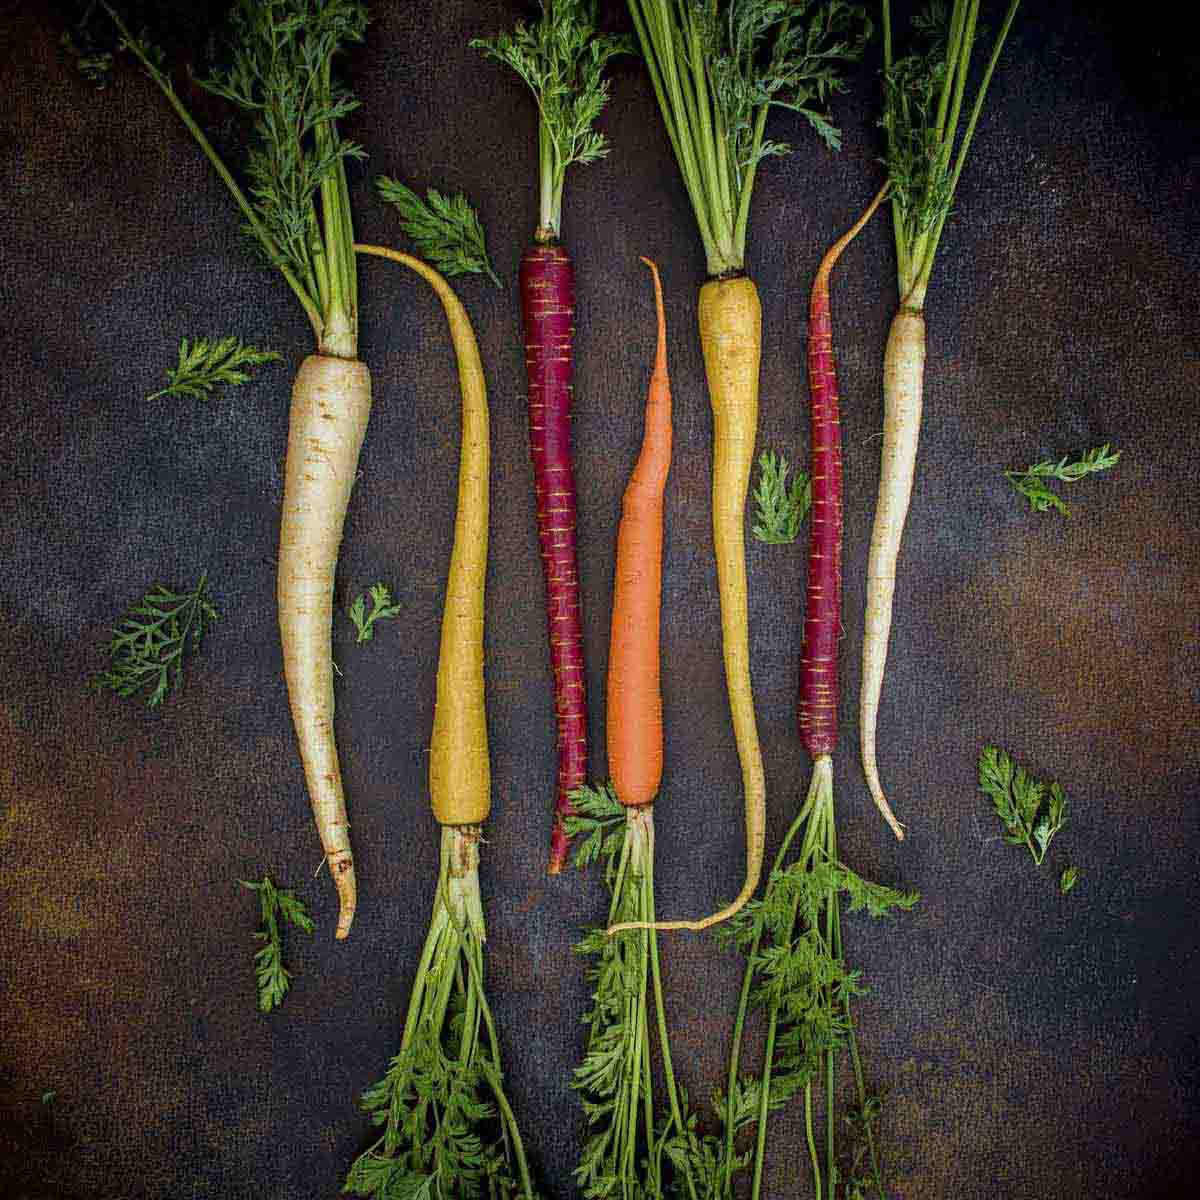 White, yellow, purple and orange carrots in a row.